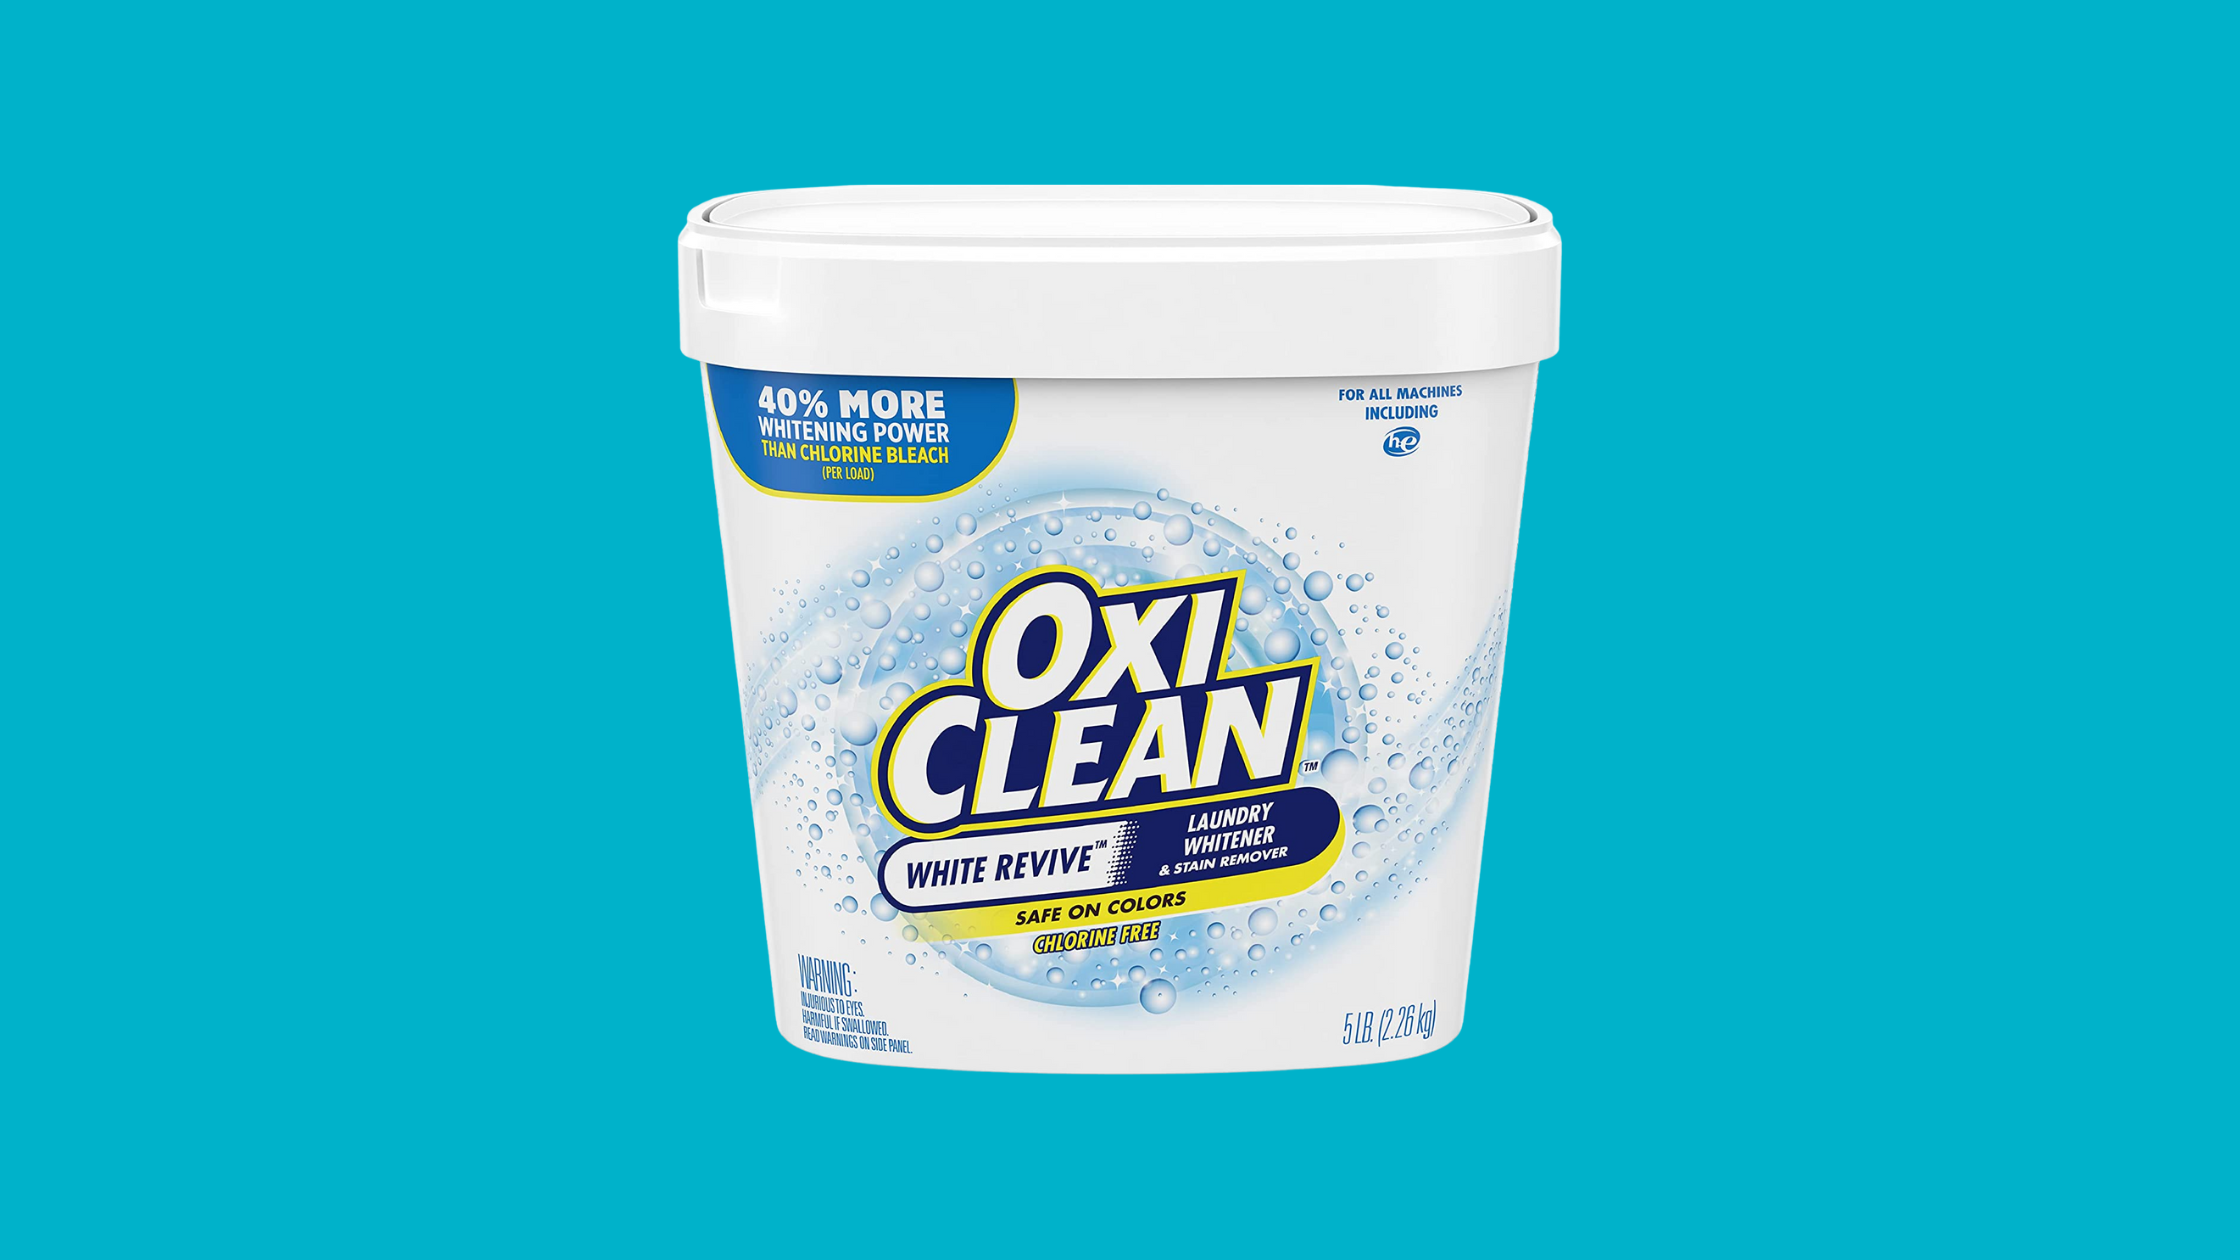 Oxiclean White Revive Laundry Whitener & Stain Remover